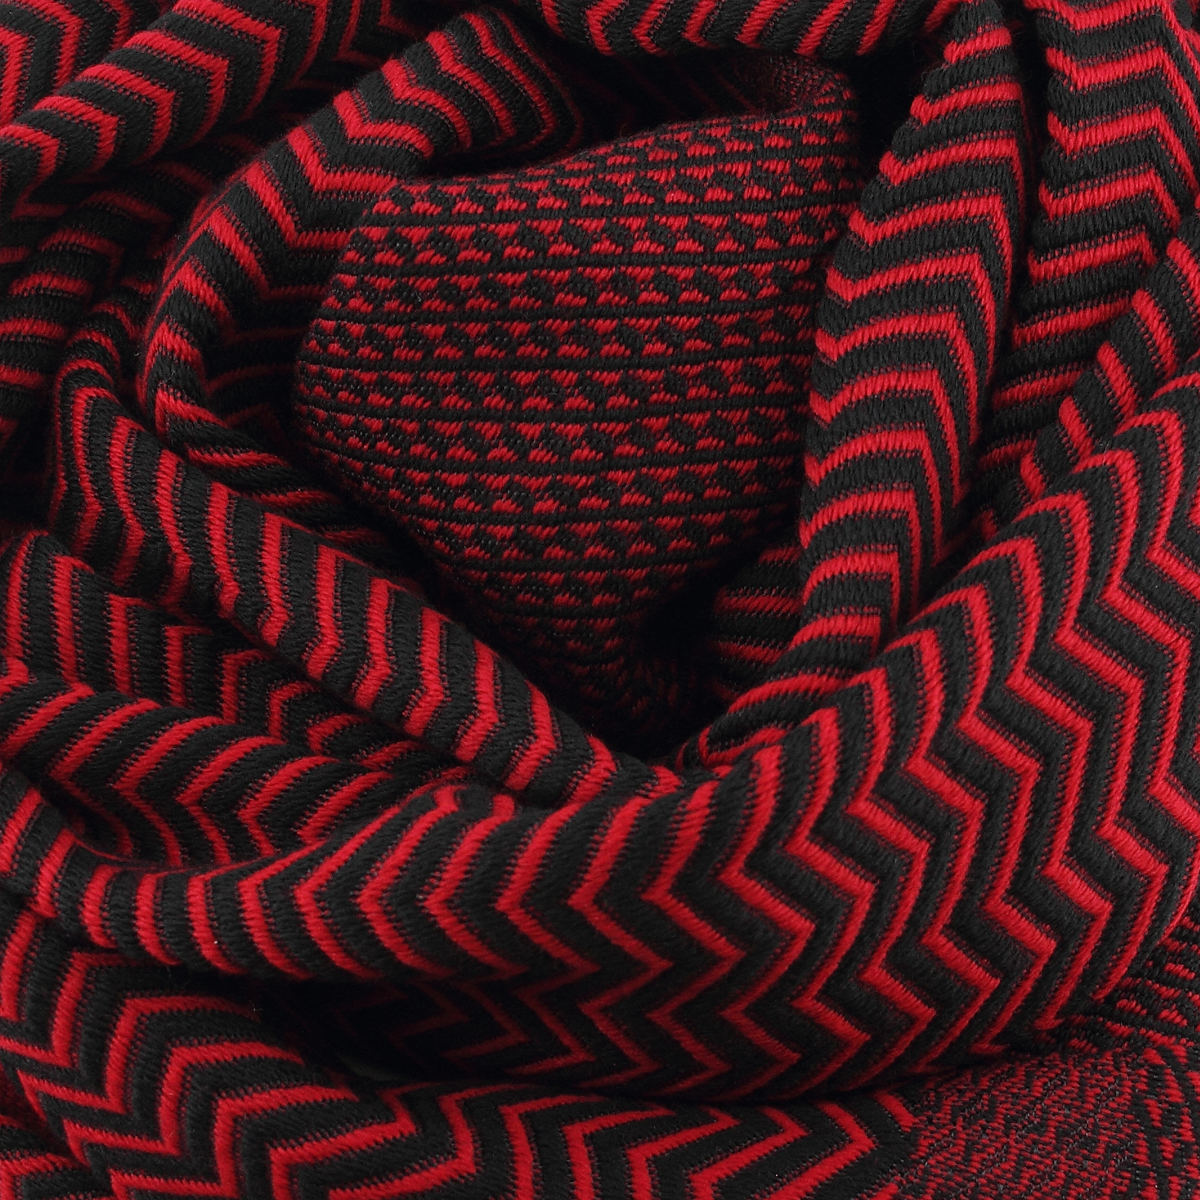 Warm large men's black and red wool and silk blend scarf